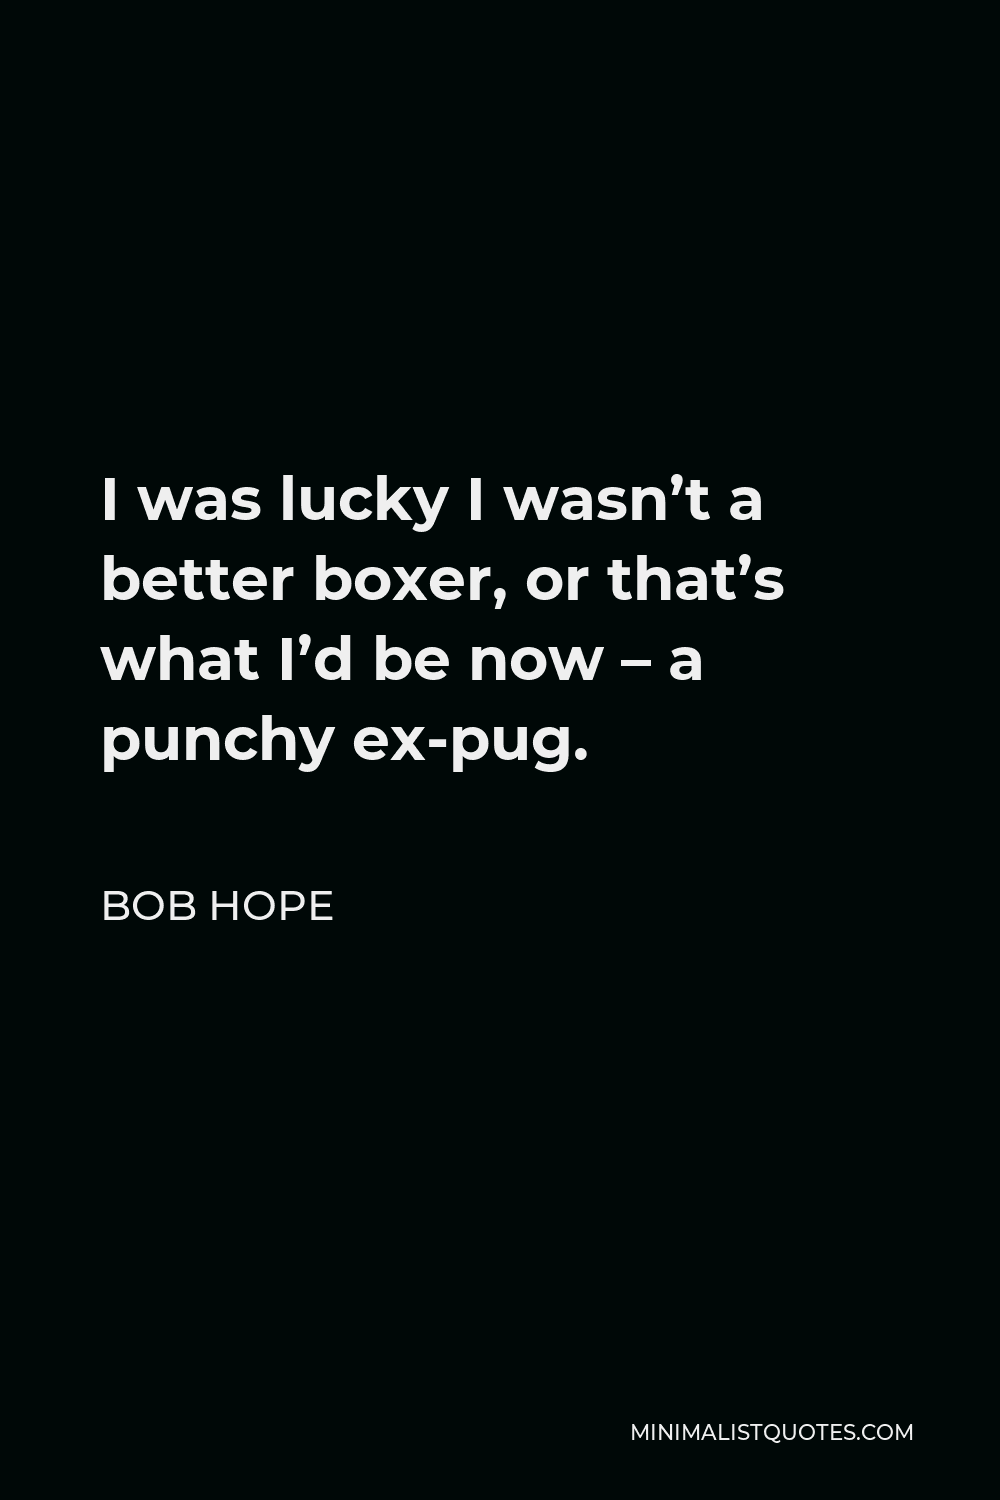 Bob Hope Quote - I was lucky I wasn’t a better boxer, or that’s what I’d be now – a punchy ex-pug.